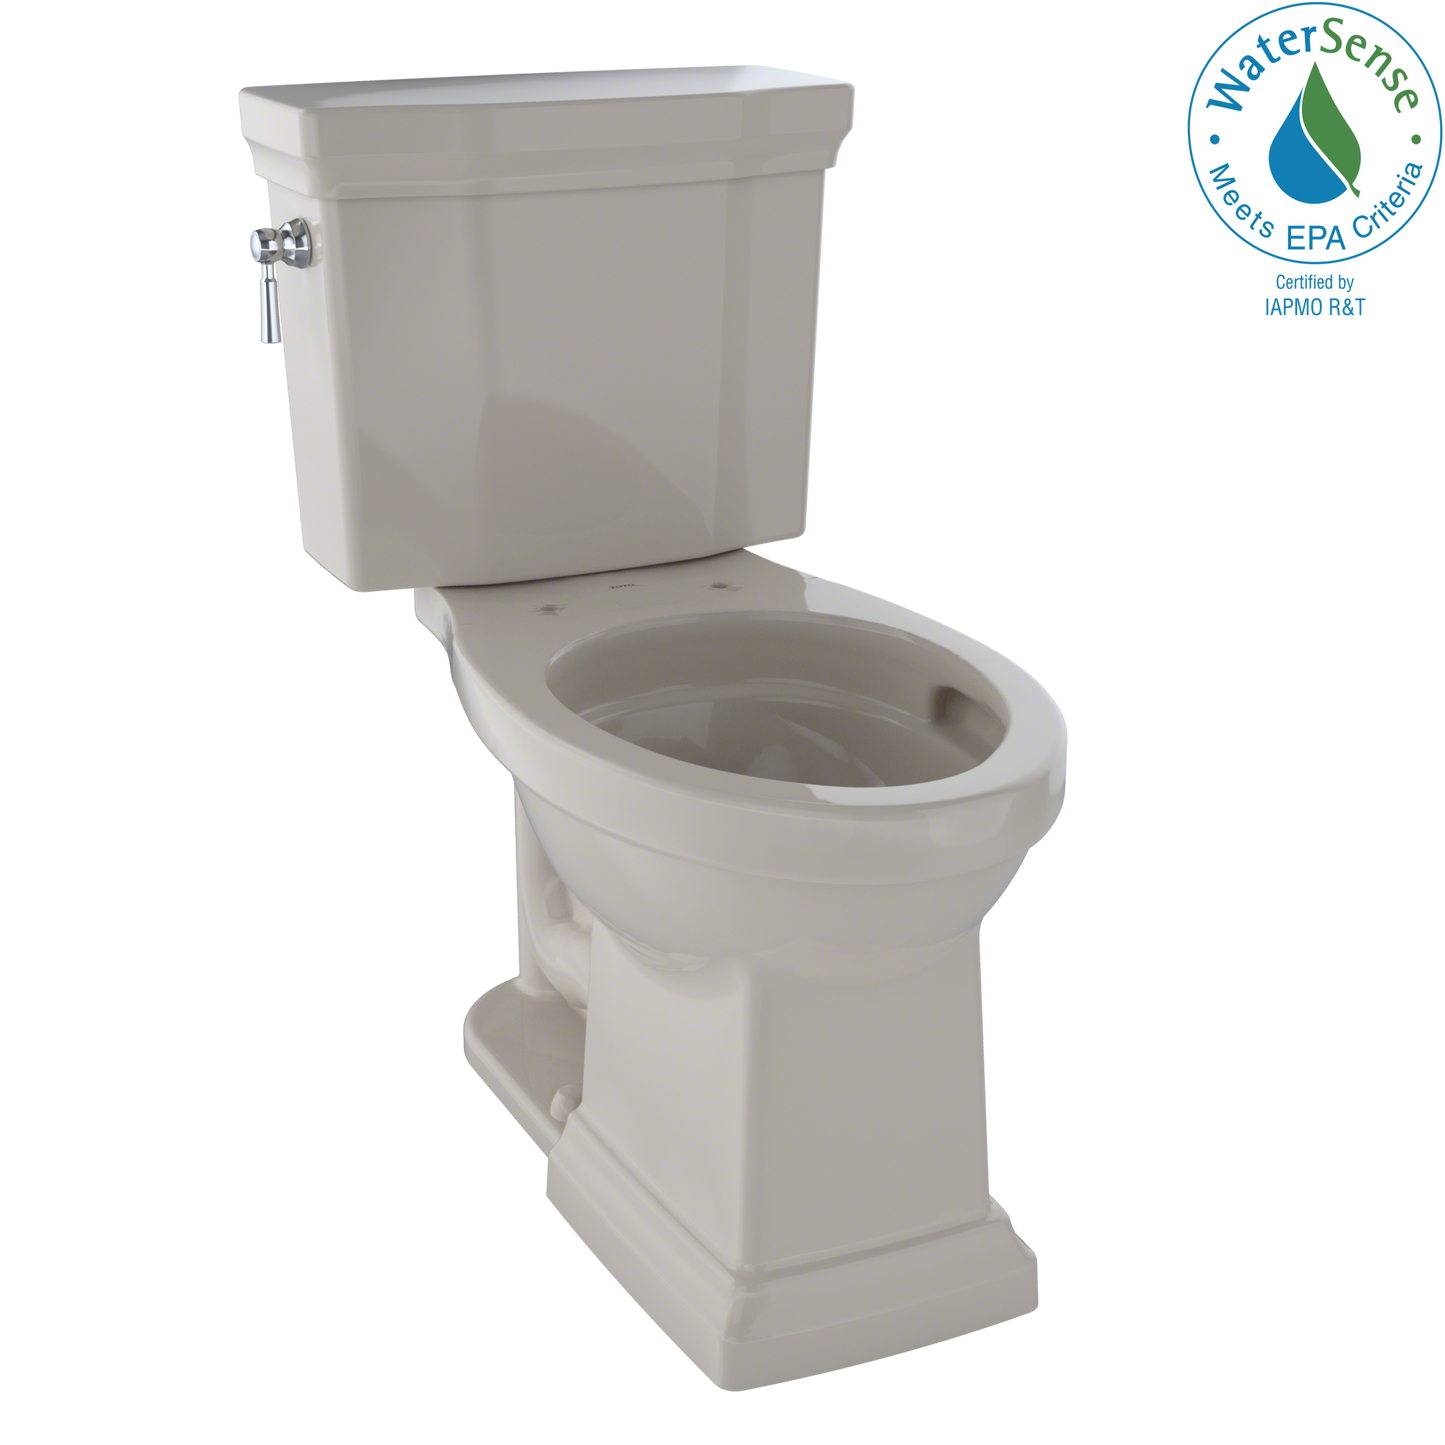 Toto CST404CUFG#03 - Promenade II 1G Two-Piece Elongated Toilet with 1.0 GPF Tornado Flush Technolog